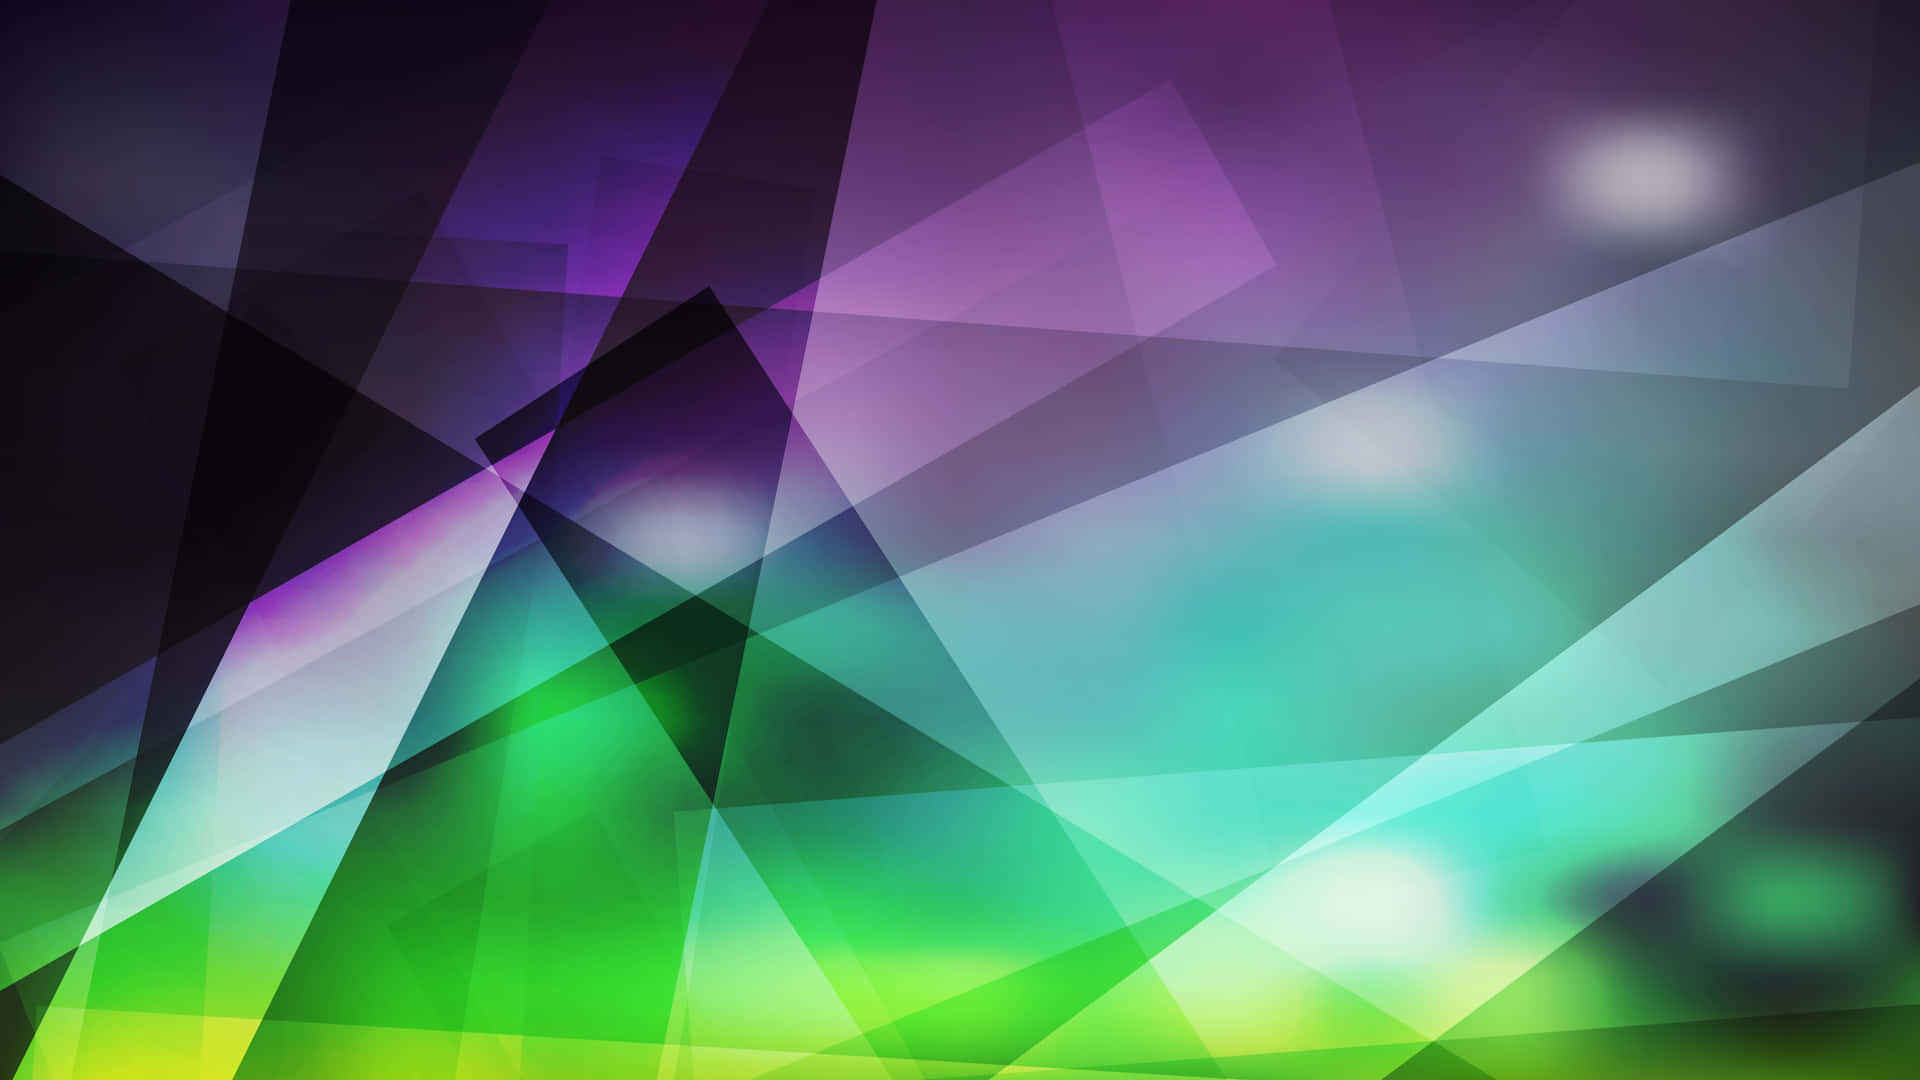 A Suspended Abstract Background of Purple and Green